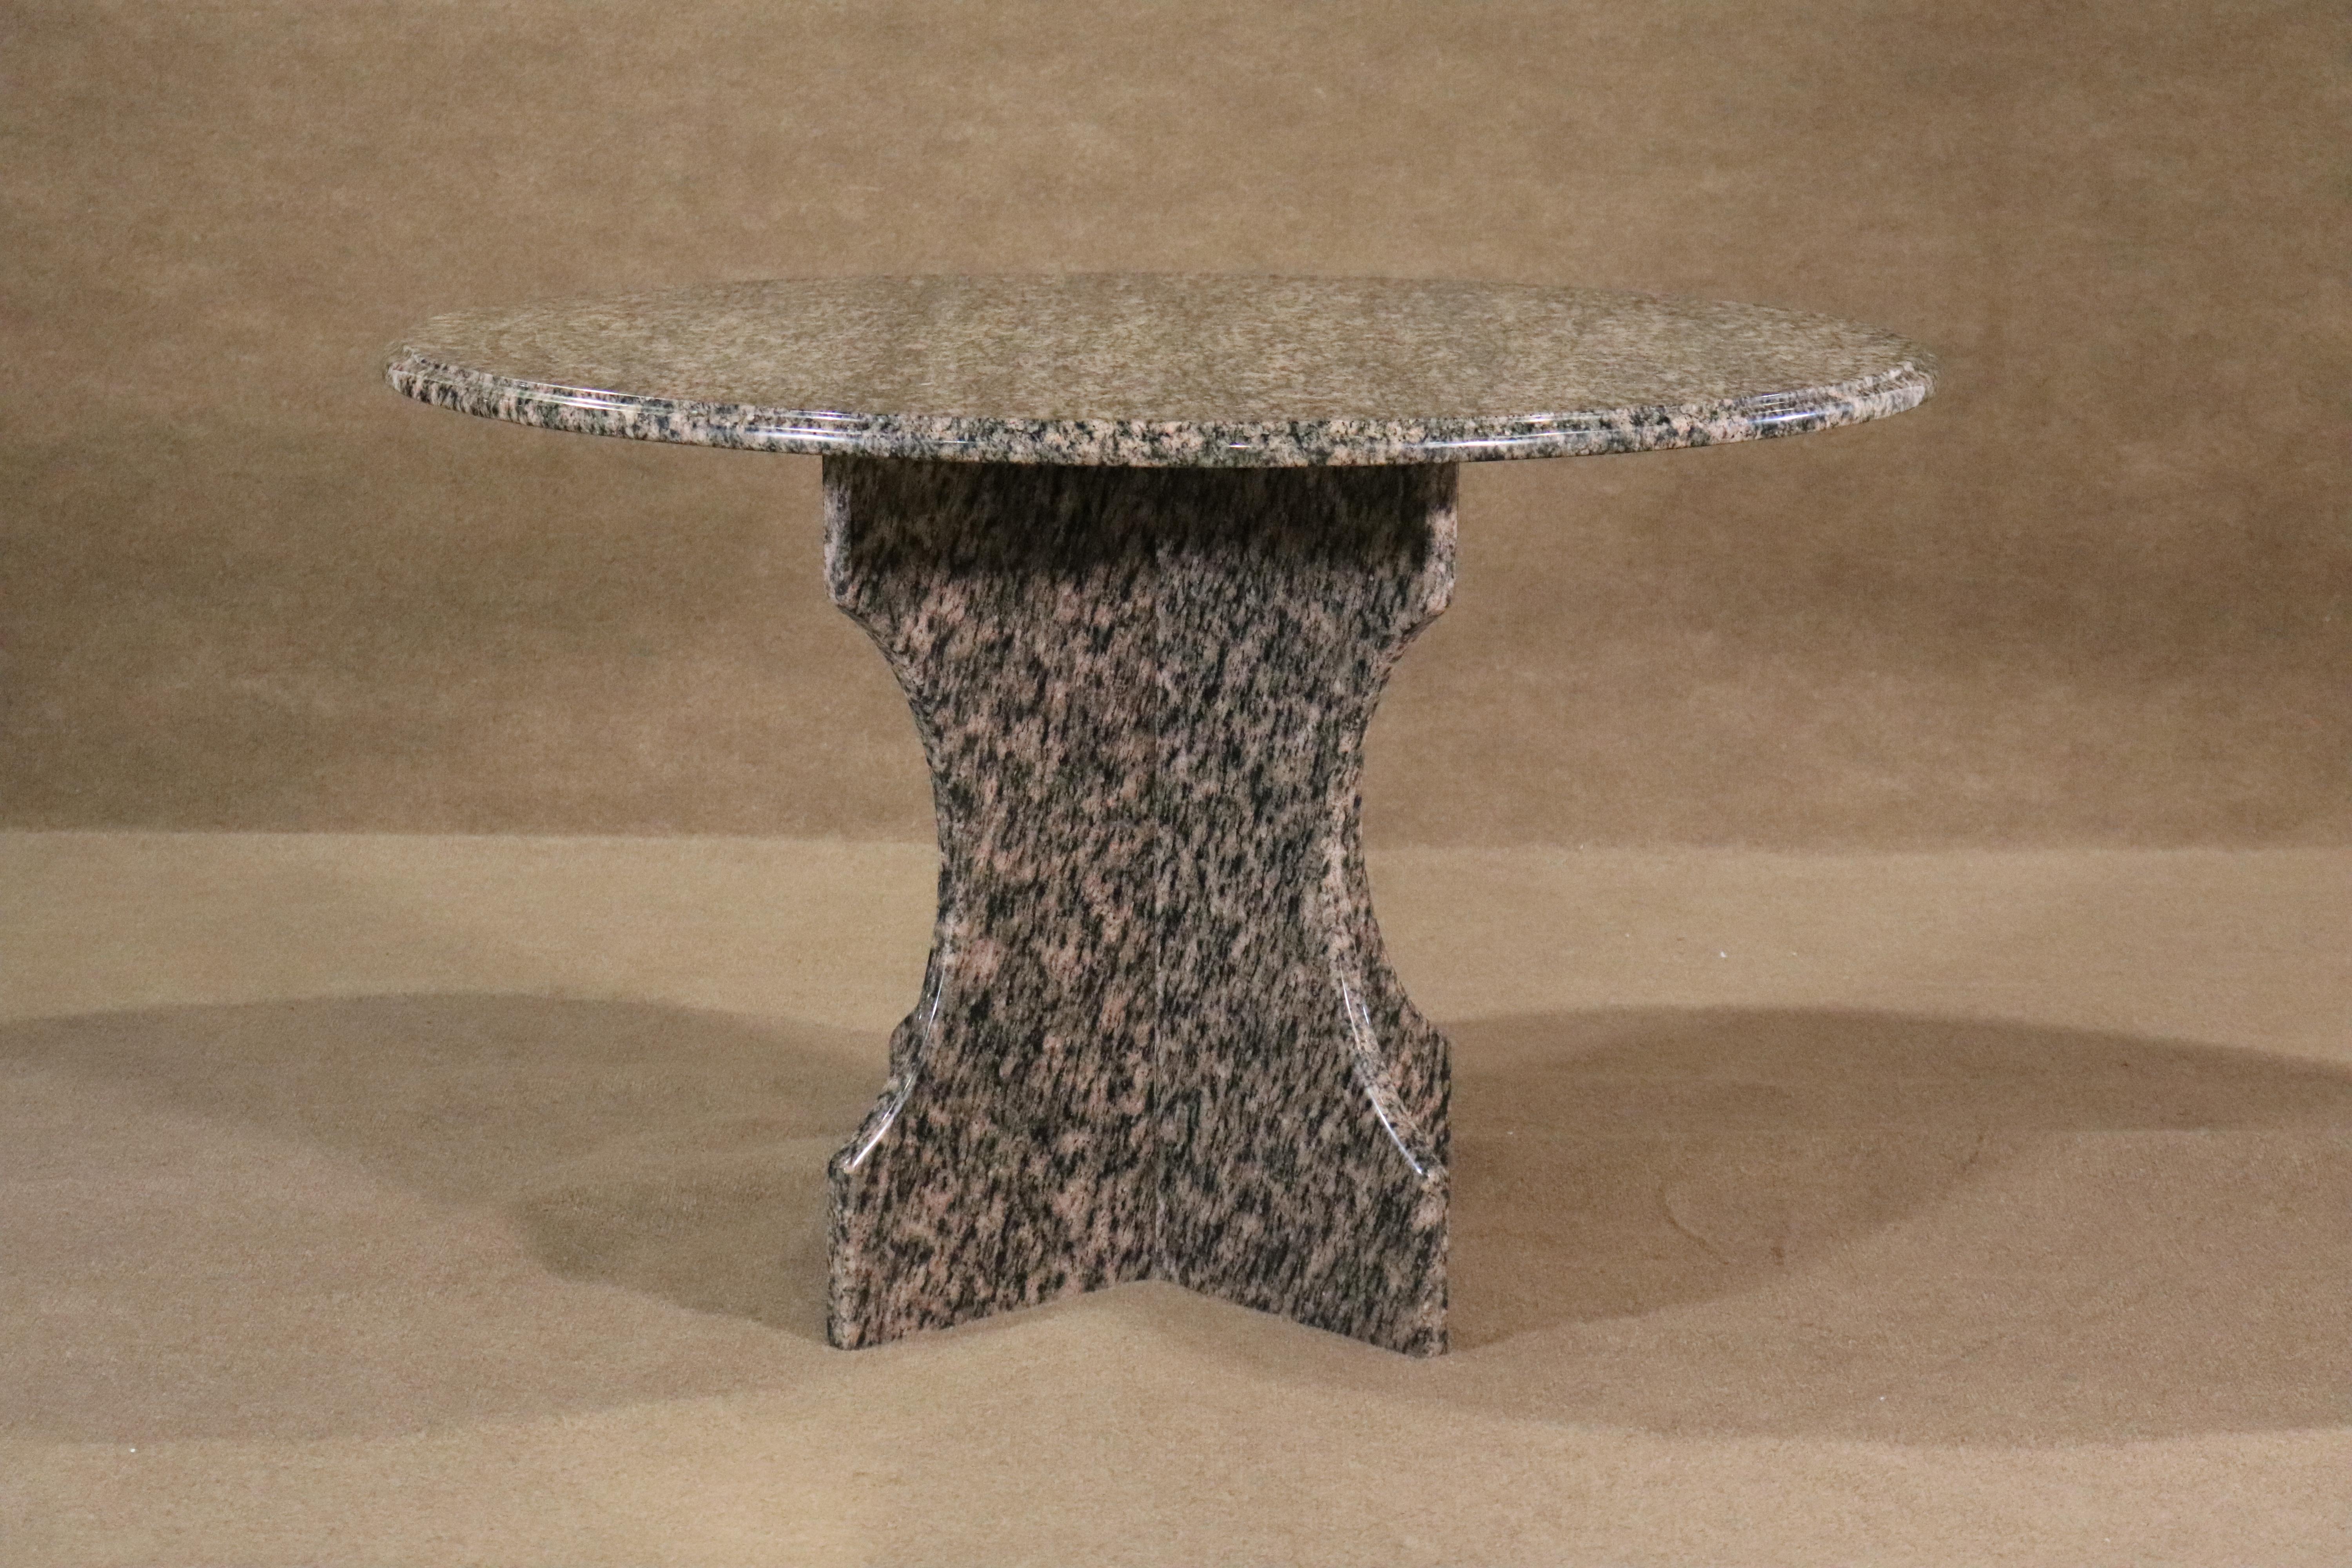 Simply designed polished marble dining table set on an X frame stone base.
Please confirm location NY or NJ